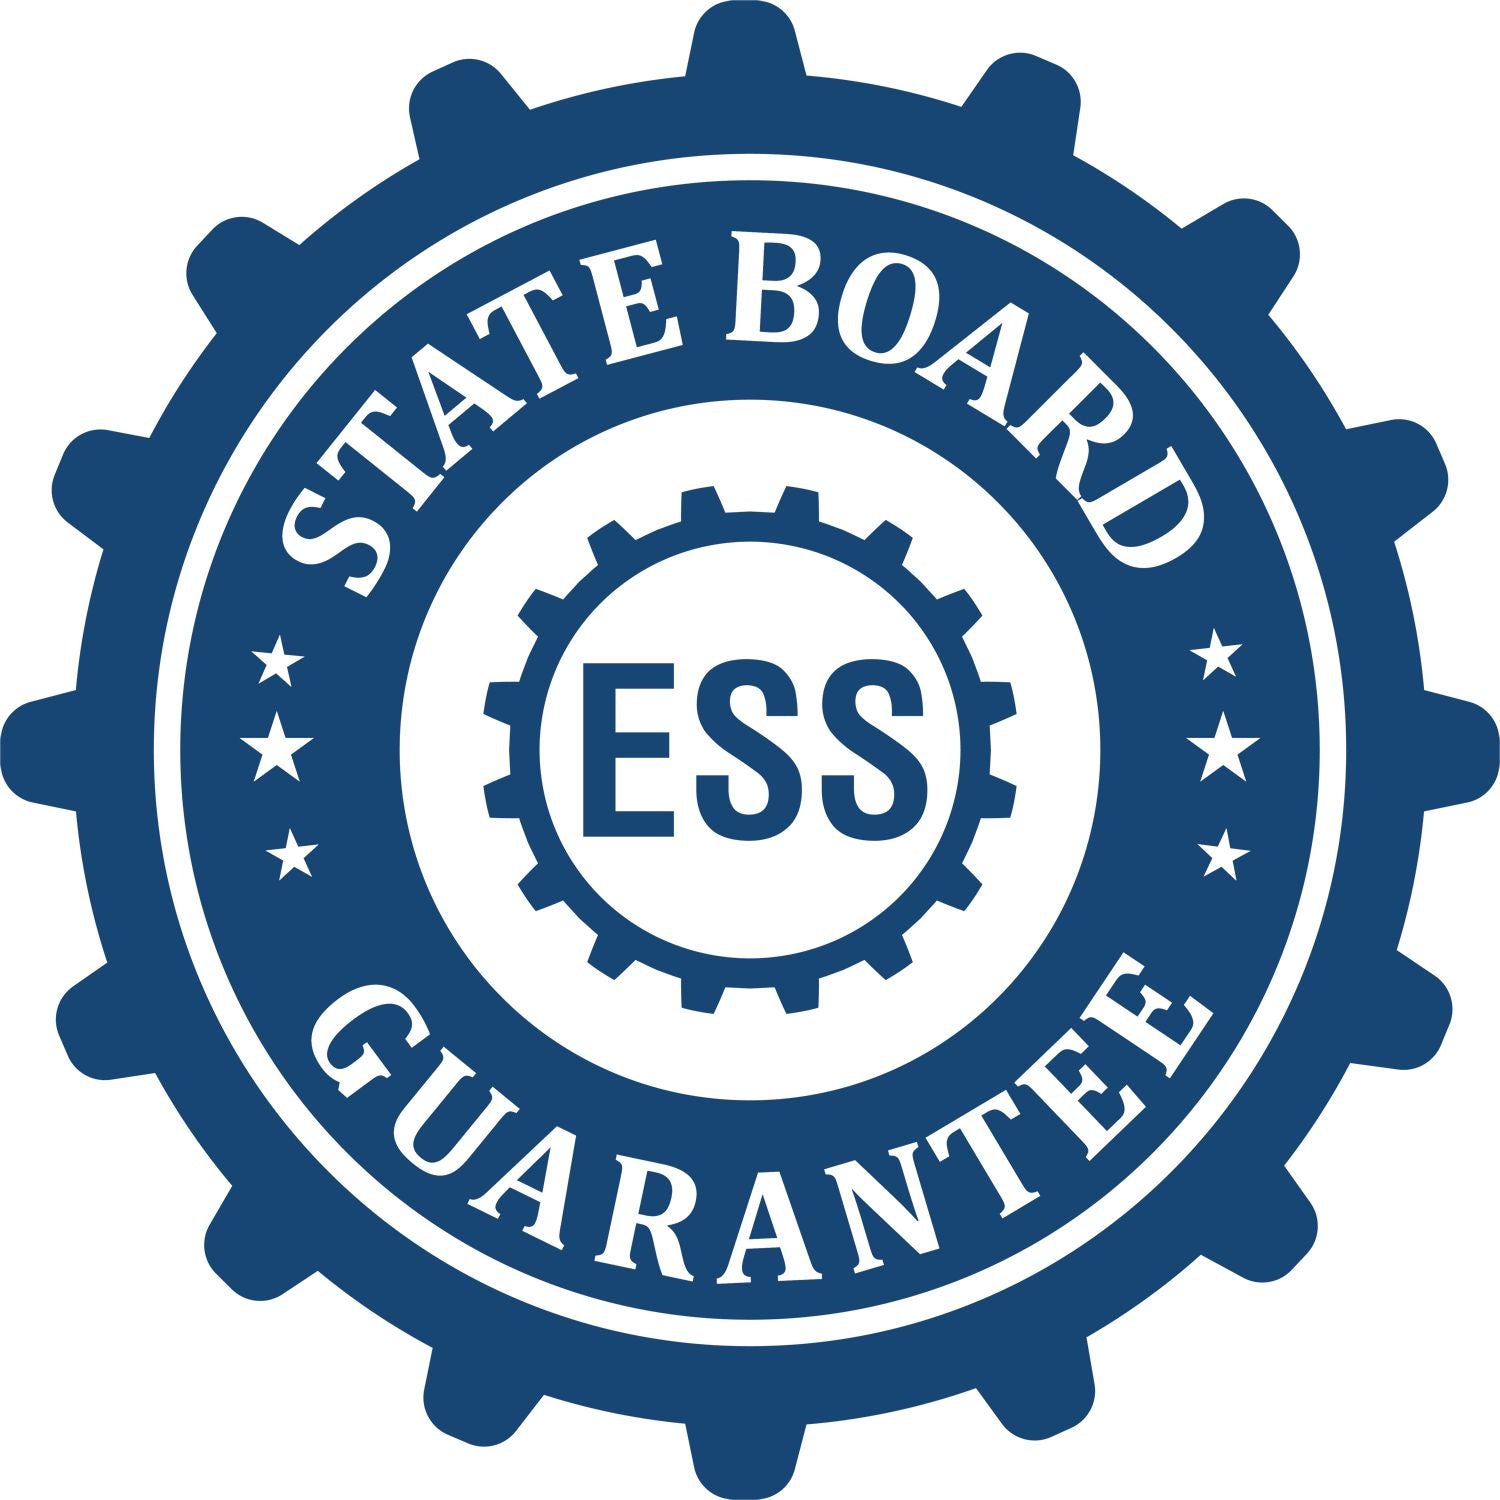 An emblem in a gear shape illustrating a state board guarantee for the Alabama Long Reach Landscape Architect Embossing Stamp product.